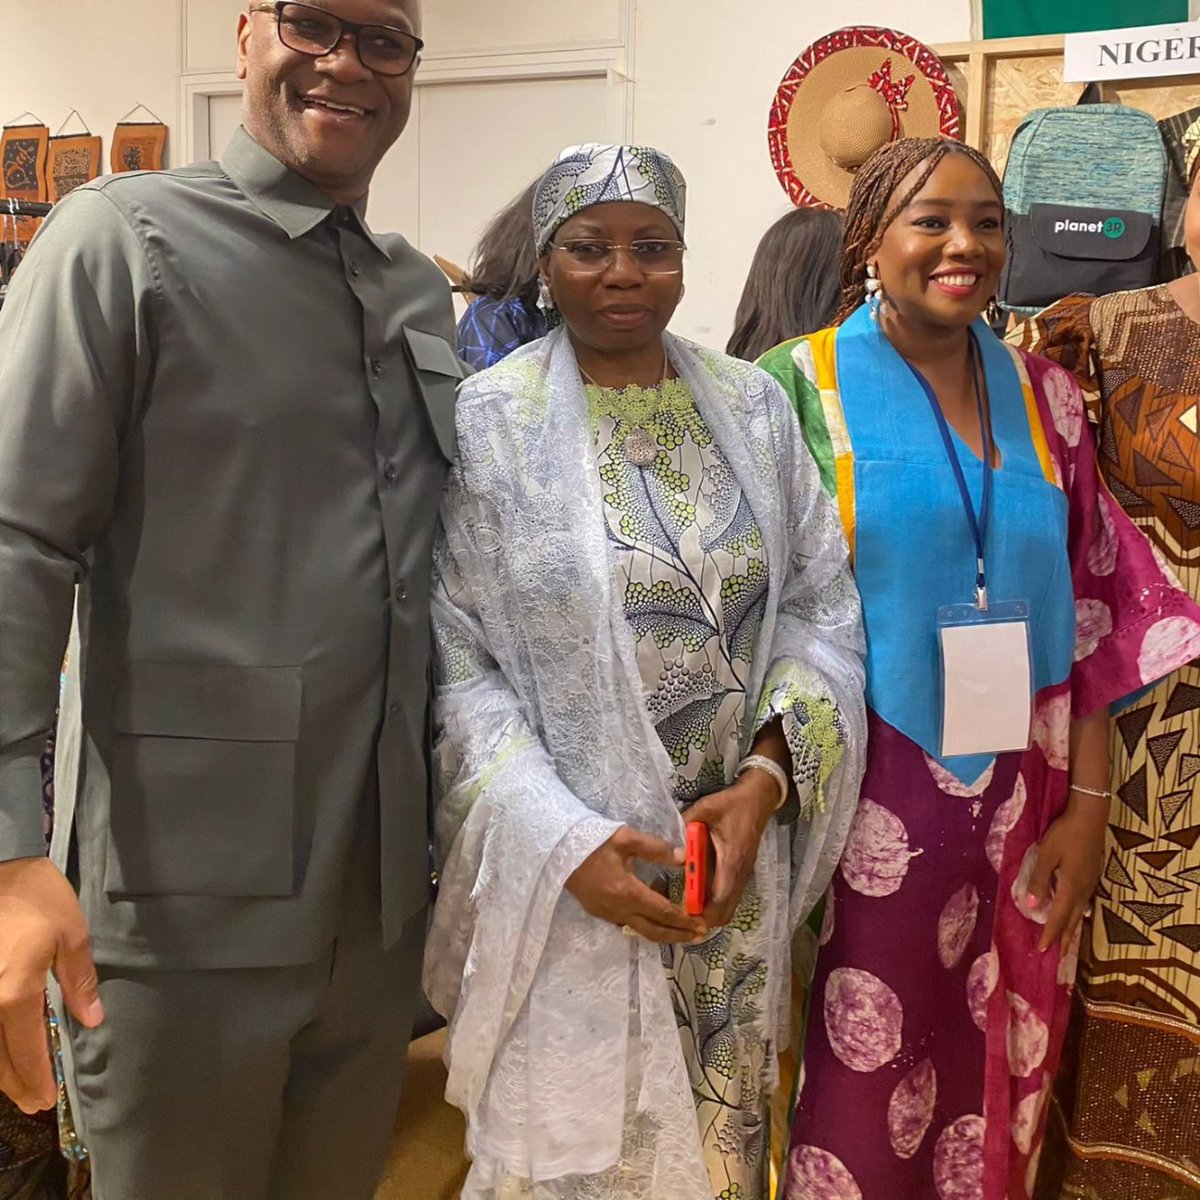 #AfricaWeek | Ambassador @NathiMthethwaSA, South Africa's Permanent Delegate to UNESCO, participates in the 2024 UNESCO Africa Week opening with fellow African Ambassadors

#SAinUNESCO #SAinFrance #Africa #betterafricabetterworld #proudlysouthafrican